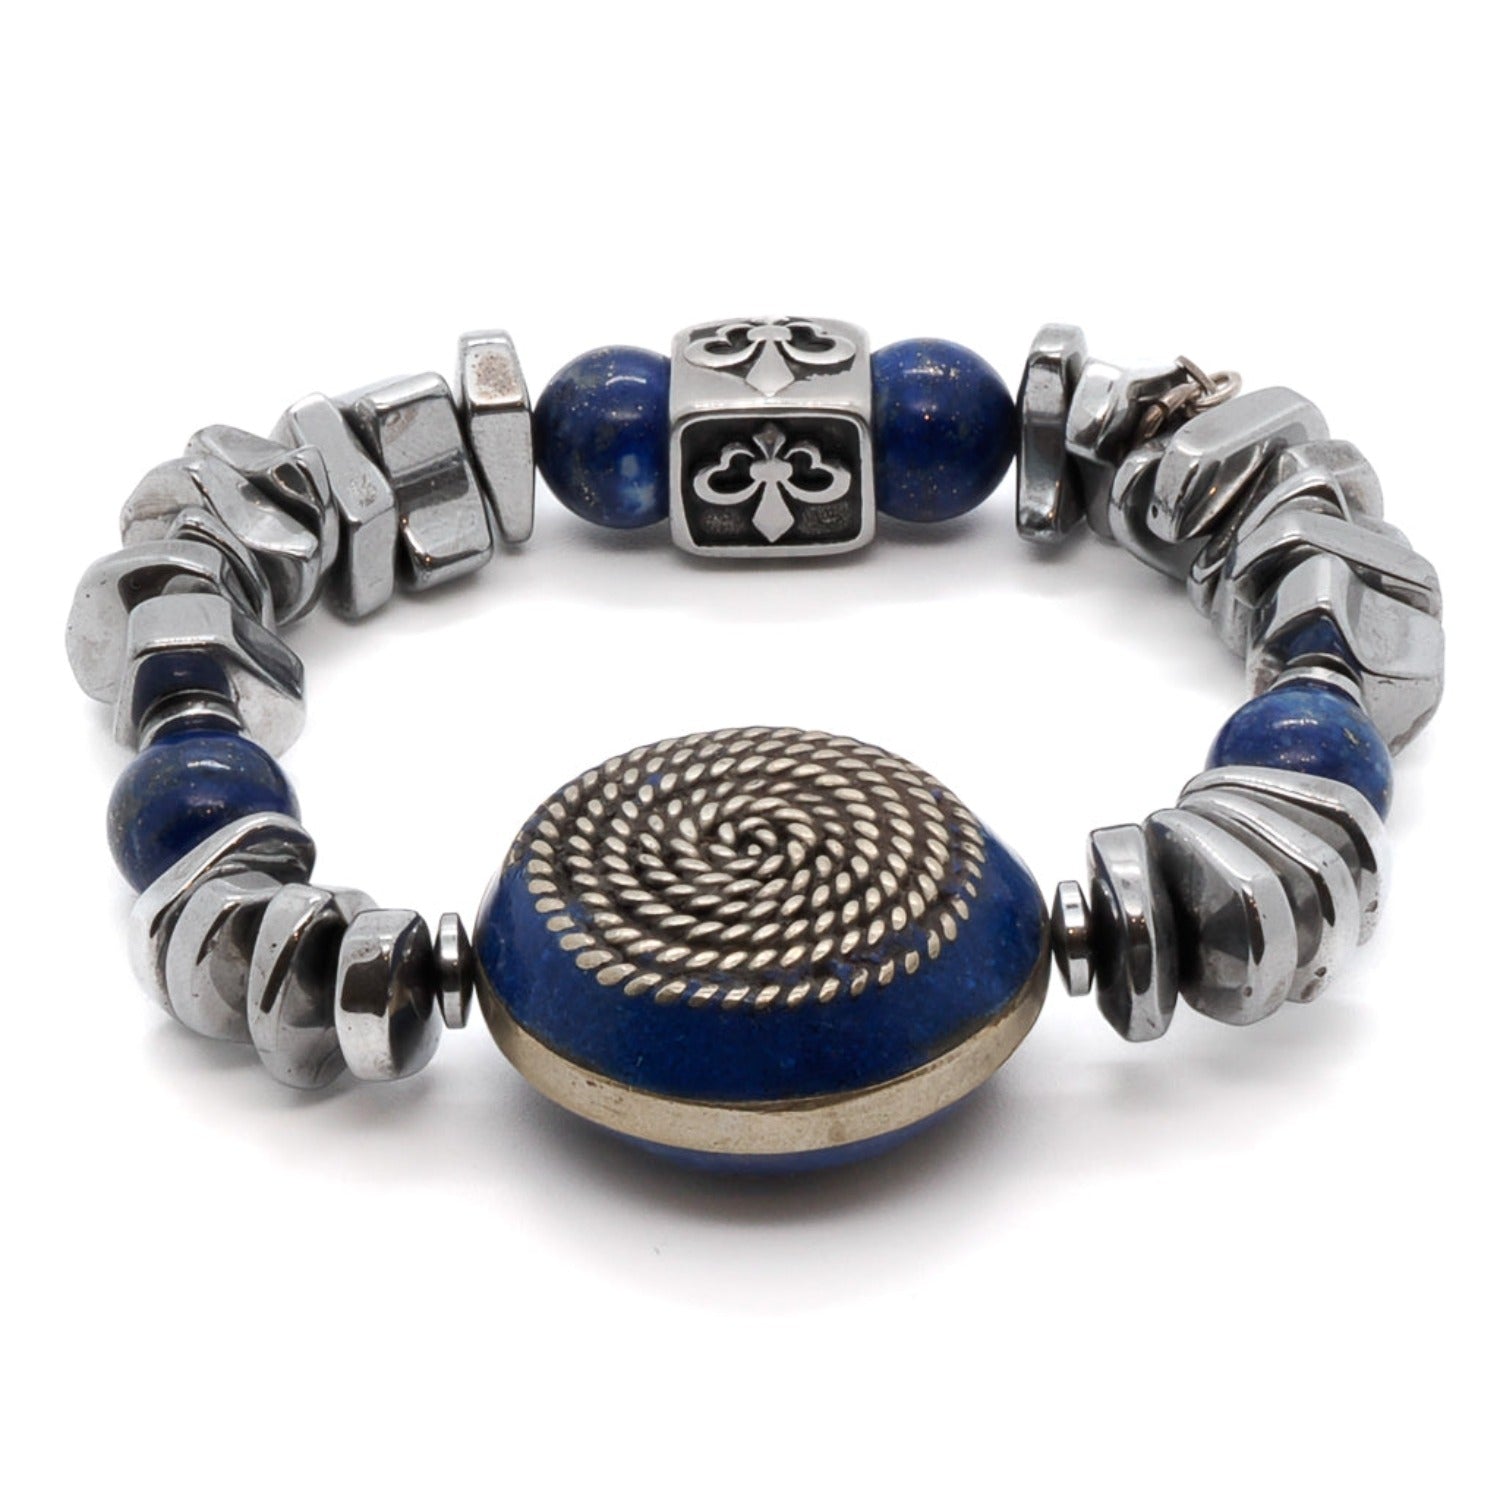 The Strong Women Bracelet exudes resilience and beauty with its combination of silver hematite and lapis lazuli stone beads.